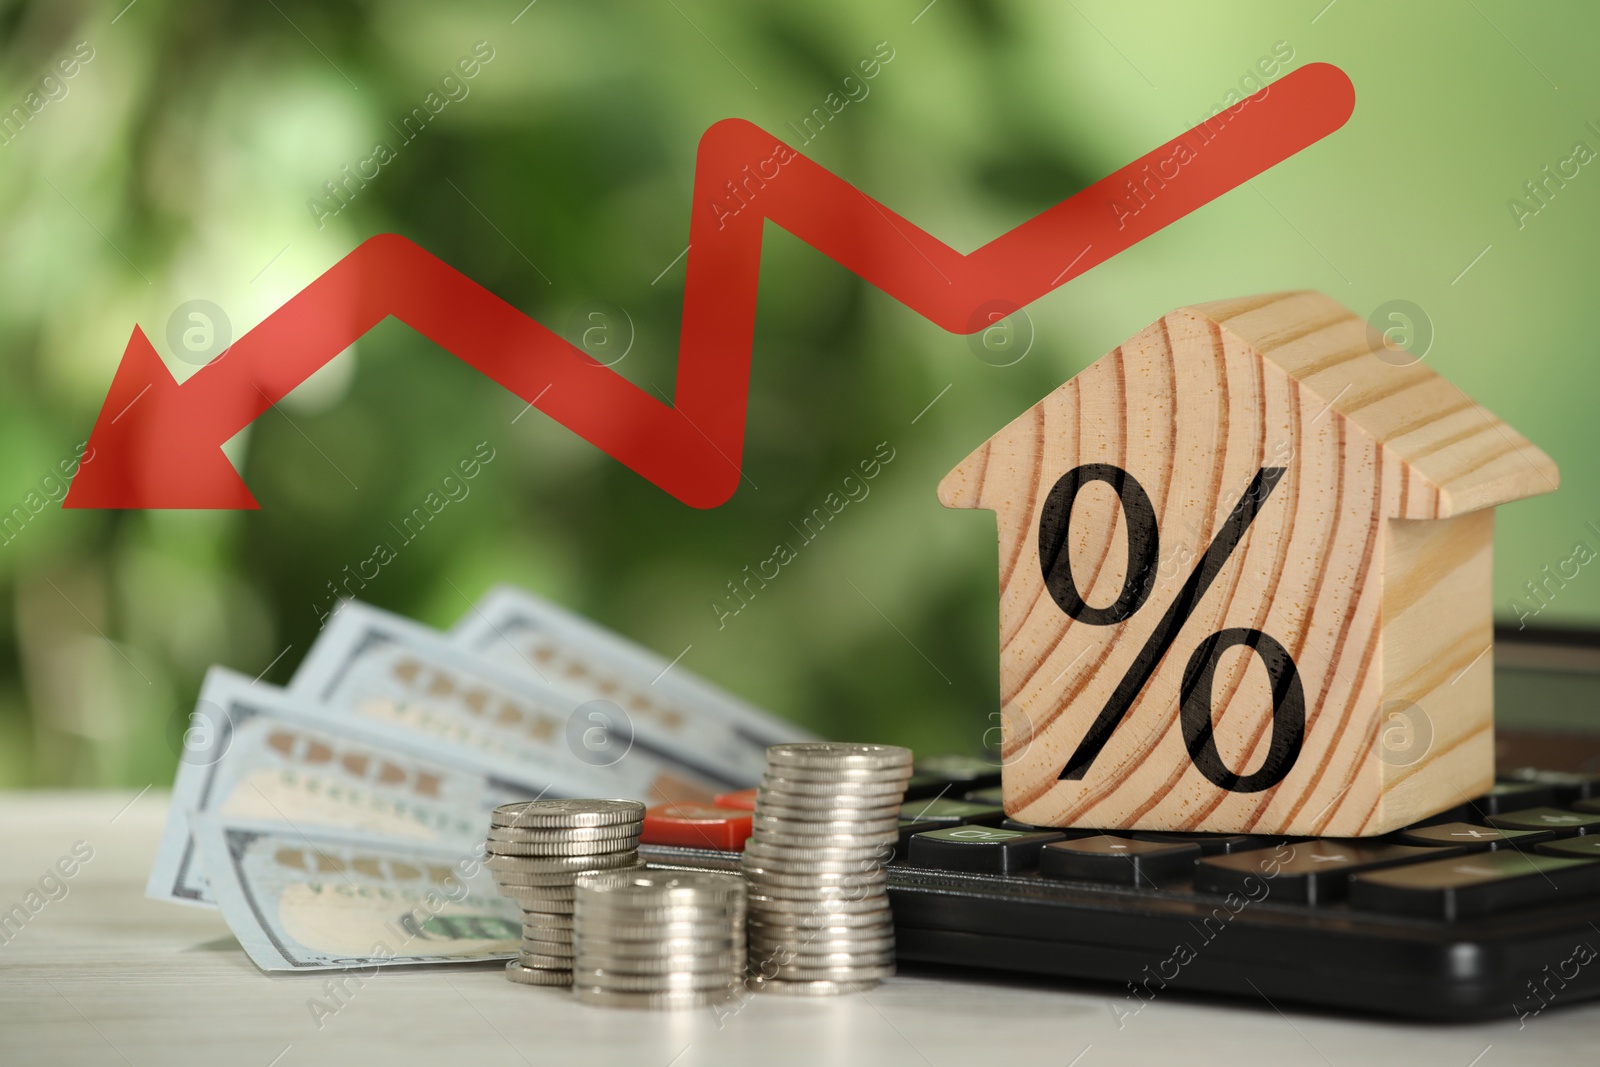 Image of Mortgage rate falling illustrated by downward arrow and percent sign. House model, money and calculator on table